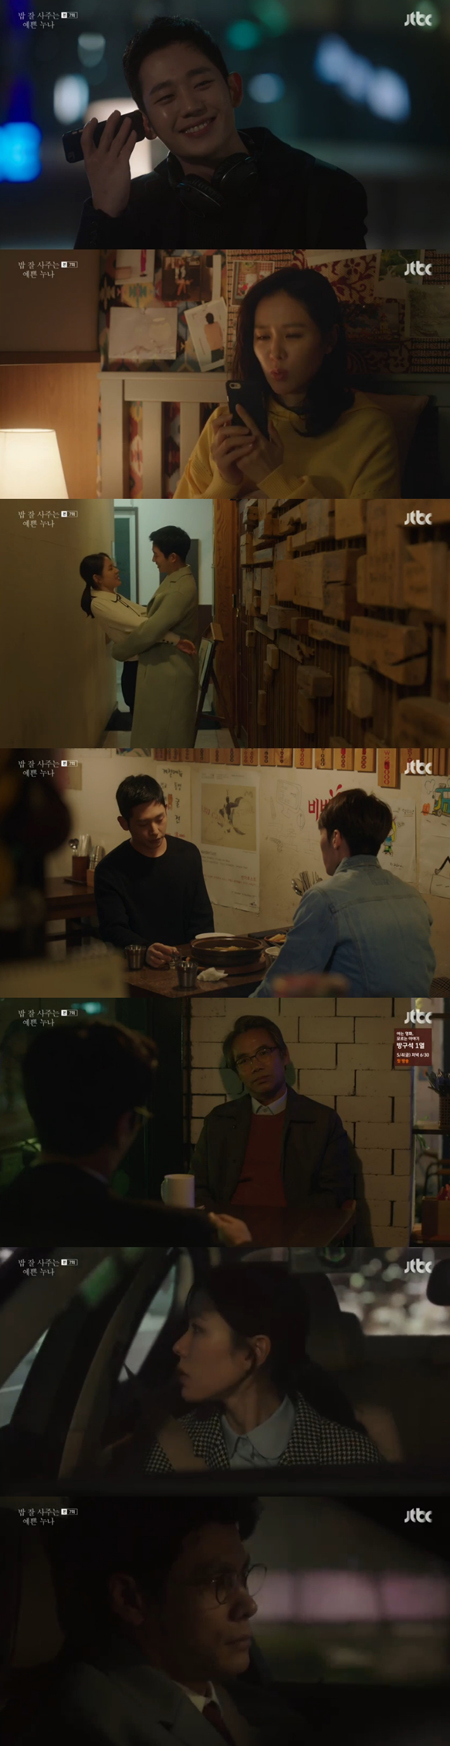 If you buy well in rice is a beautiful older sister While love of Son Ye-jin and Jung Hae-In further deepened, Olun did not abandon Son Ye-jin yet and added threatening actions.Lee Kyu-min (Olun Mincho) put Yoon Jin-ah (Son Ye-jin minutes) on the car and turned somewhere, in an afternoon that was broadcasted on the afternoon of the 20th  A figure to create an atmosphere was drawn.Seo Jun-hee and Yoon Seung-ho (Upper Ha Jun minutes) who knew the fact that Yoon Jin-ah is in the police station.The two headed straight to the police station, and Yoon Seung-ho witnessed an incredible scene.Seo Jun-hee hugged Yoon Jin-ah and held it.Lee Kyu-mins mother (Jung Eli) looked at Seo Jun-hee and asked Someone.Yoon Jin-ah replied, I am my boyfriend.After knowing that his guess was facts, Yoon Seung-ho decided to make a dark expression and to get in touch with Yoon Jin-ah coldly.Seo Jun-hee feels uneasy Yoon Jin-ah Just a female boy has met, and that I love.It will be a problem and made me feel relieved.Yoon Jin-ah answered, Yoon Seung-ho started already, something is already hard, Seo Jun-hee said again I think it is easy.It is all I do to prevent it showed a reliable appearance.Lee Kyu-min revealed the fact that Yoon Jin-ah encounters Seo Jun-hee on Yunsangi (Oh ​​Man-seok minutes).You treat me as shameful, right? Ringo Hashira.Yoon Jin-ah also met other guys.I do not care to meet my brothers friends. Yunsangi said, Good.From the time I was a child, I can understand how steady and kind we look like a son. In words such Yunsanggi drunk a single person to soothe complex hearts.Seo Jun-hee whose heart became heavy carried Yoon Seung-ho and a liquor seat.Seo Jun-hee said to Yoon Seung-ho It is not unconditional from the country.What is the reason? Yoon Seung-ho said, Mother, father thinks you are your son.Yoon Jin-ah is a daughter.After that, what is your sister (Jang So Yeon minutes) in the primary election?Why is it Yoon Jin-ah? Seo Jun-hee answered Yoon Jin-ah, Yoon Seung-ho laughed as if he was amazed, How much do you see so?I am called you two people. Seo Jun-hee will not retire, Yoon Jin-ah never give up.Do not sway my sister. Two people who came out of the bar.Yoon Seung-ho said to Seo Jun-hee Yoon Jin-ah struggling to kill.It is still difficult to admit but Yoon Seung-hos heart that I decided to believe in my friend Seo Jun-hee was put in as it was.Ball iron ball (Efaryeon minutes) asked Yoon Jeong-ah, who was supposed to investigate only what female staff of Yoon Jin-ah would like to study for, said Sotonya.Then Yoon Jin-ah talked, I think that it is a word rather than a sentence with no arts because it was too much, and made the ball iron balls embarrassed.I want you to understand with a good heart if it is missing in me so far, the ball iron ball asked, Why are you suddenly so so?Then, Yoon Jin-ah said, I was aware of how important I was, but it became an idea that I had to see and help everyone who strives to protect me by treating me more than me It was.I hope the person can feel more secure. Seo Jun - hee who heard this from the side table smiled a faint smile.Lee Kyu-min put Yoon Jin-ah on her car after relieving Yoon Jin-ah.Then, he began running on the road rapidly.To Yoon Jin-ah who noticed a strange sign, Lee Kyu-min continued to runaway by saying, I will die like you.Yoon Jin-ah showed how he ate the horror but Lee Kyu-min did not stop the threatening action.On the other hand, JTBC Pretty older sister who often buys rice is broadcast every Saturday at 11 pm on Saturday.L JTBC Broadcast Screen Capture